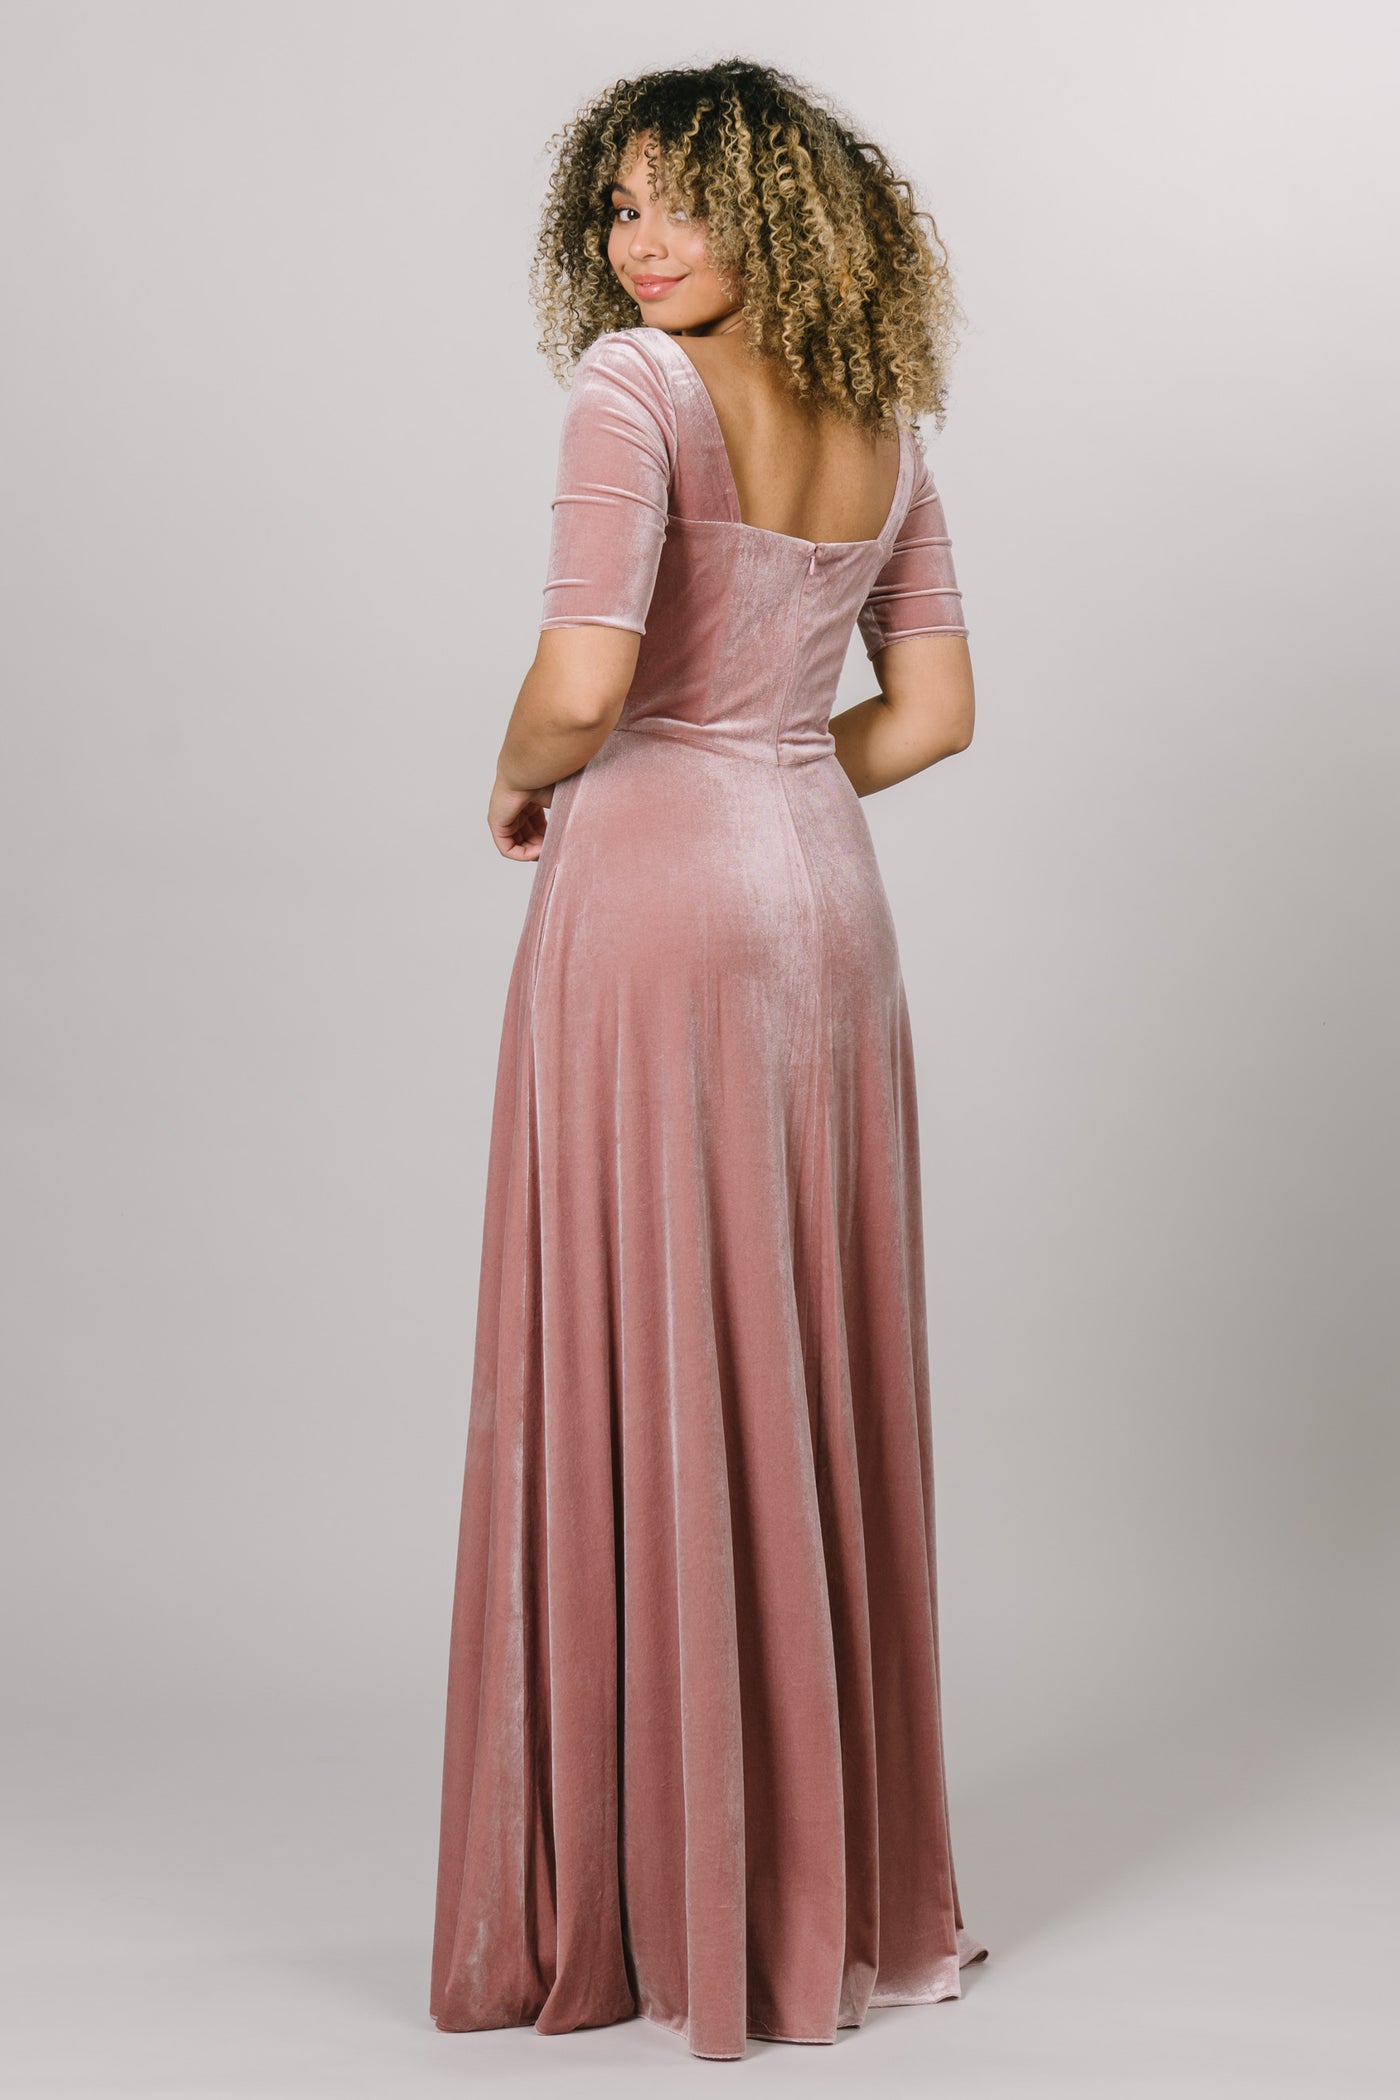 Back view of velvet pink dress with a low back. Modest Dresses - Modest Prom Dress - Formalwear Modest Dresses - Bridesmaid Modest Dresses. 